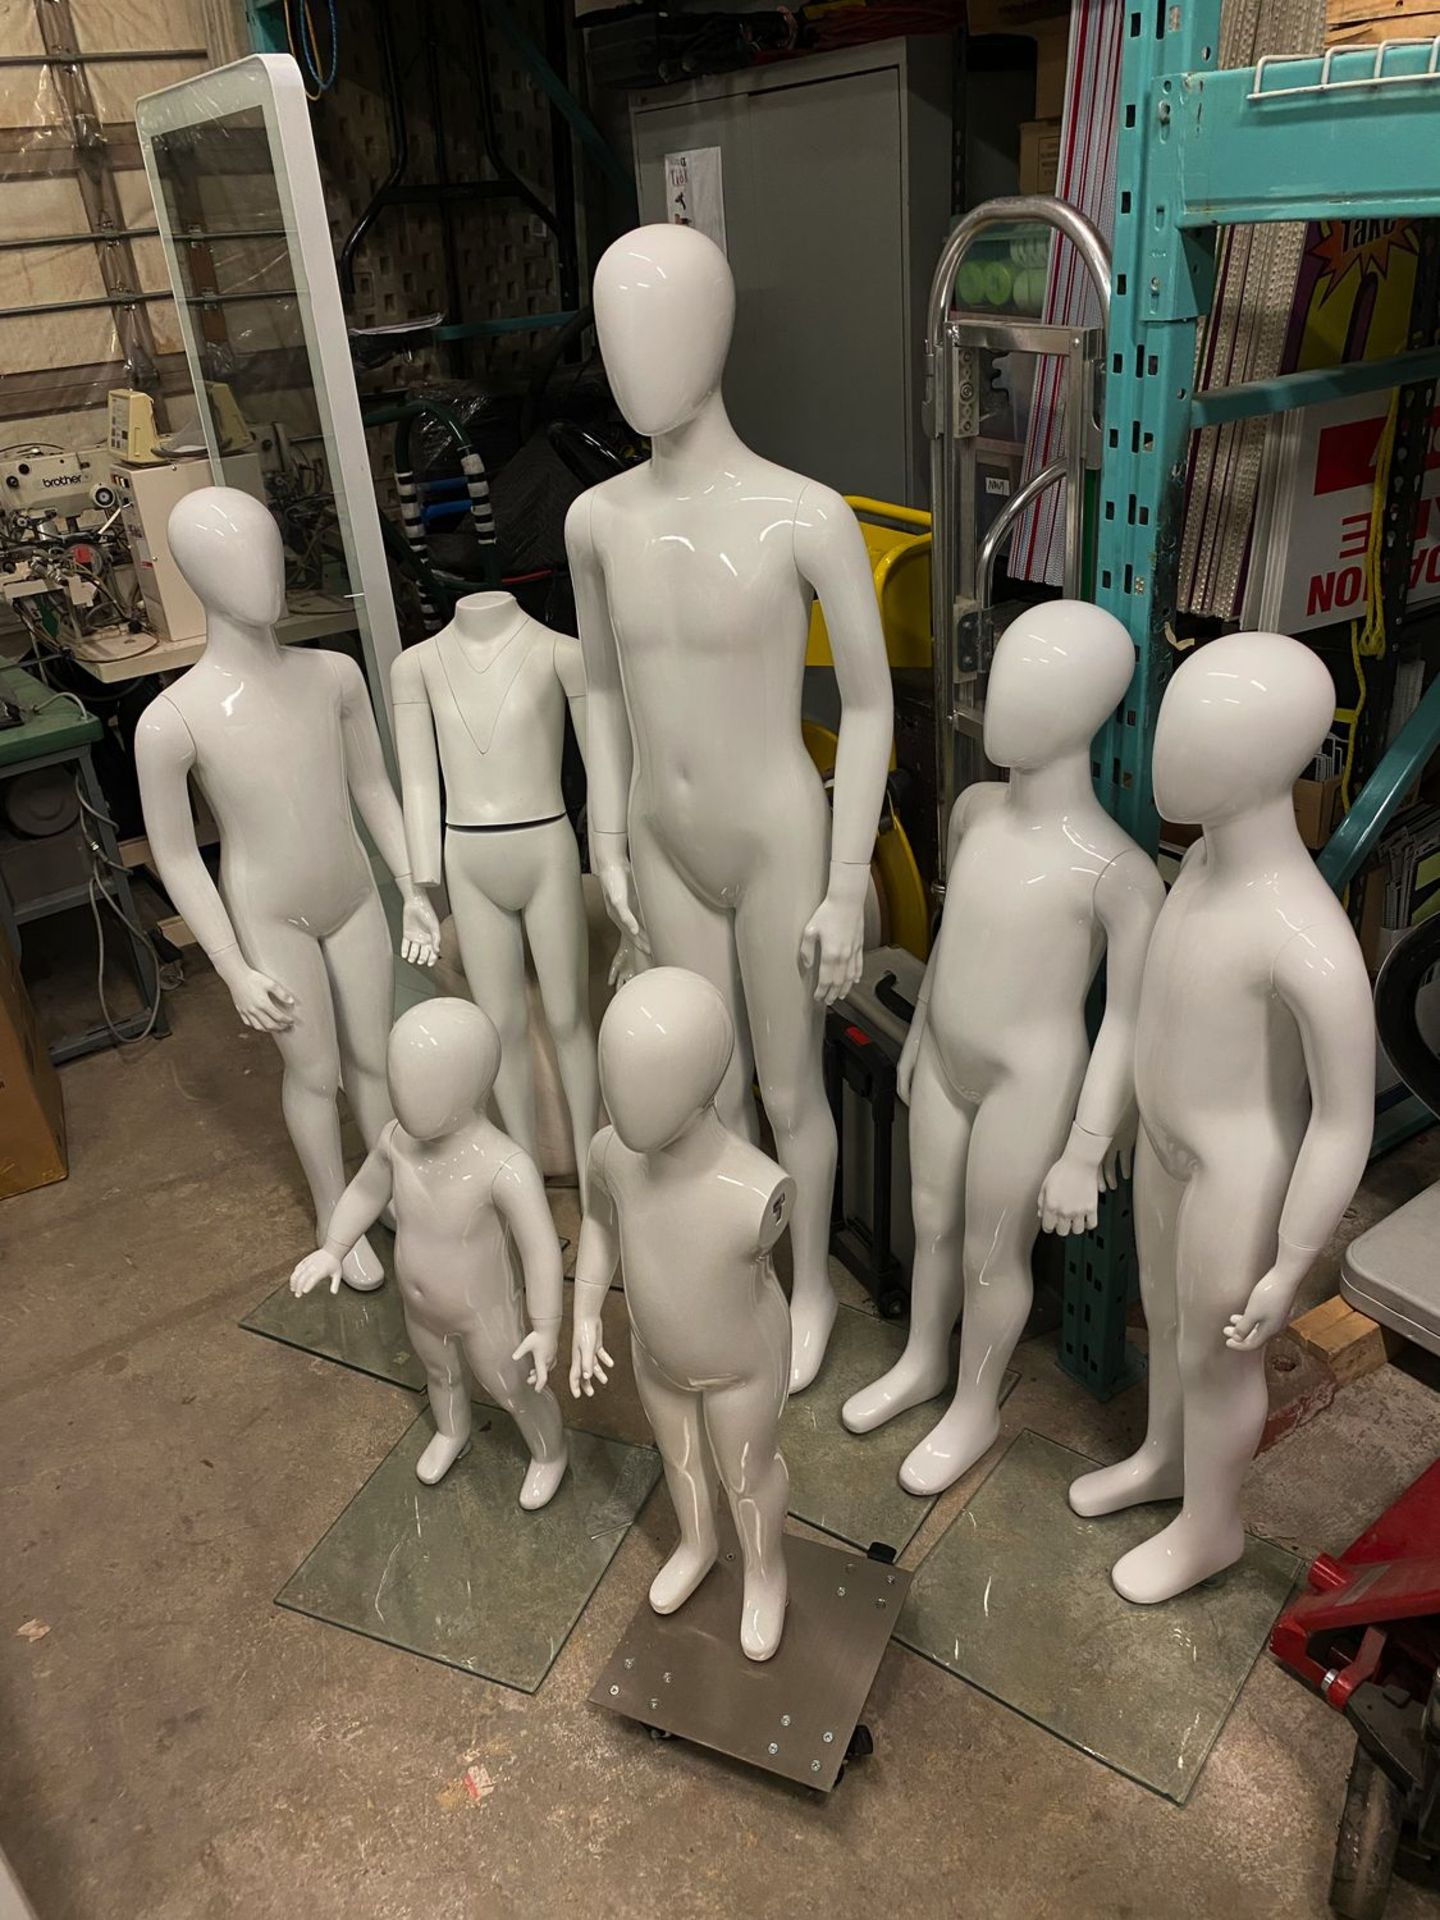 LOT - (8) ASSORTED MANNEQUINS, (5) GLASS BASES, (1) ROLLING METAL BASE, & (1) WHITE OTTOMAN - Image 3 of 3